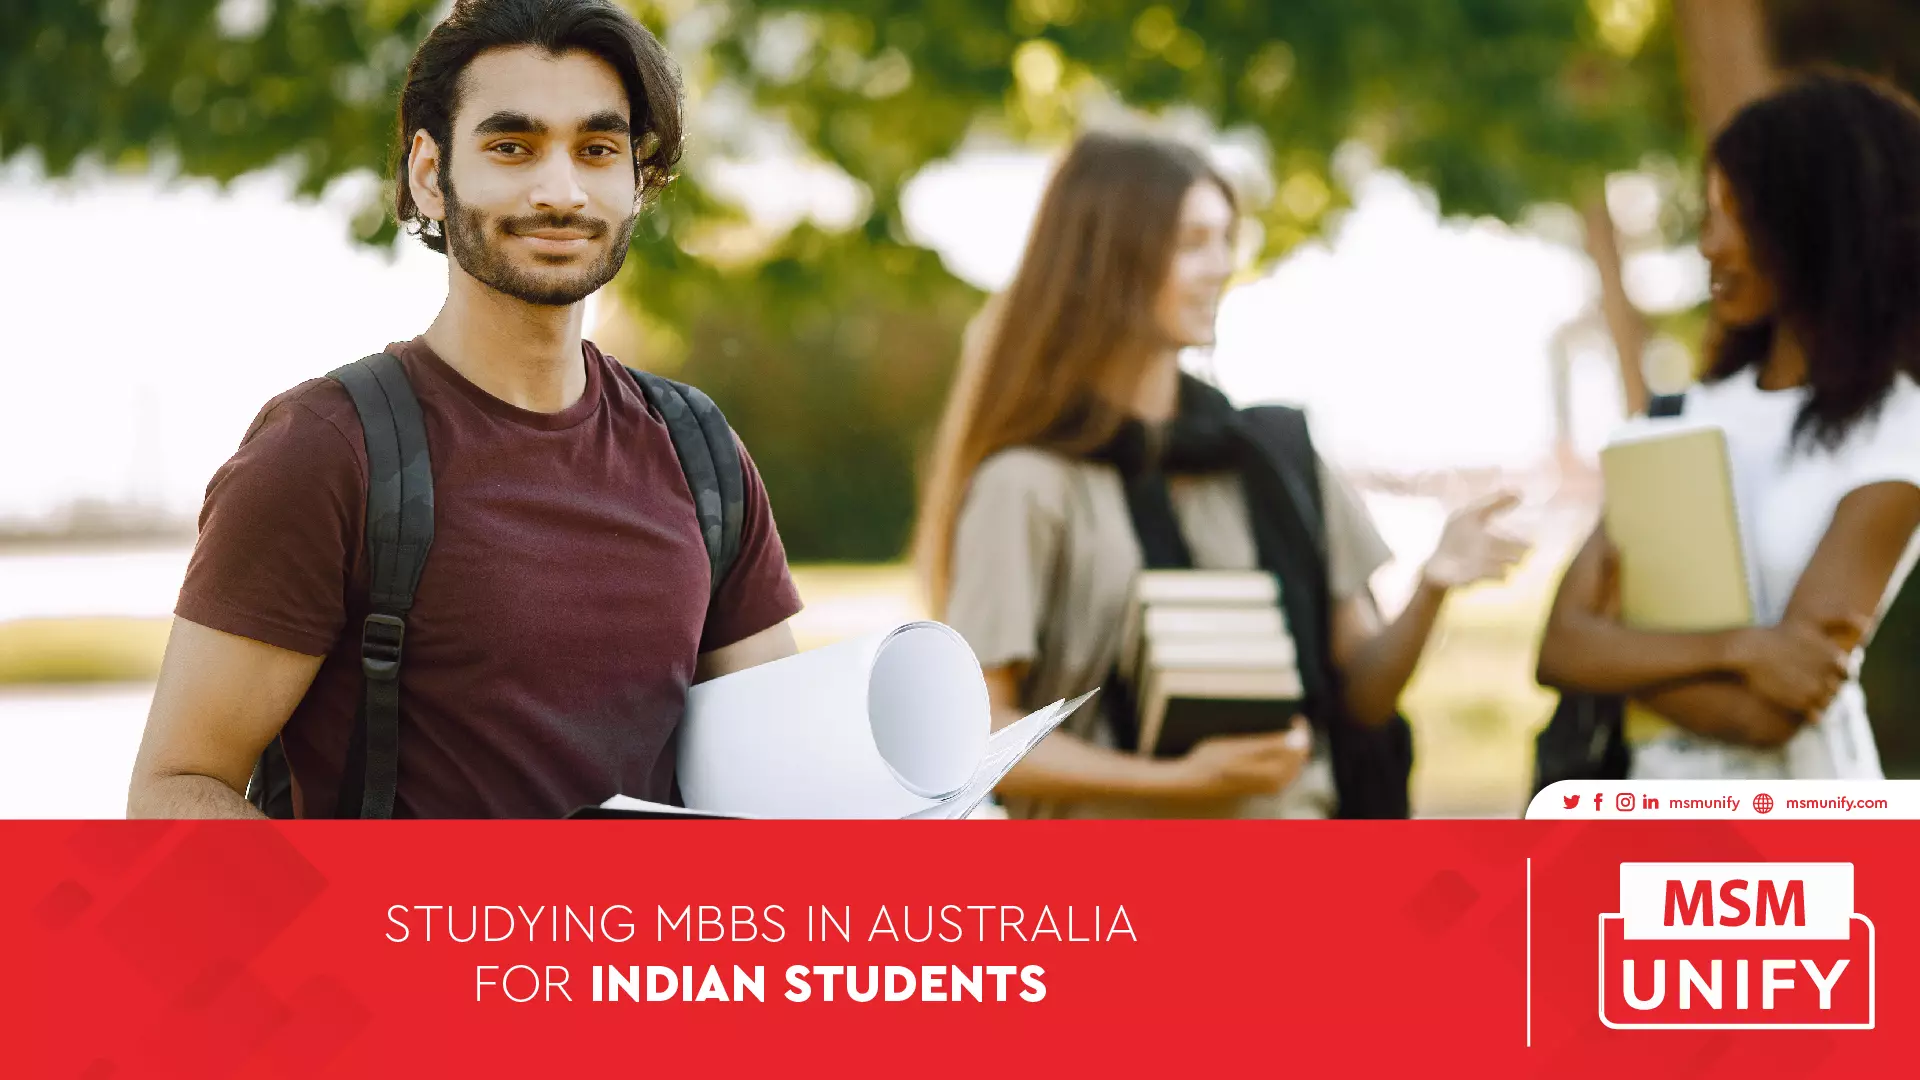 121322 MSM Unify Studying MBBS in Australia for Indian Students 01